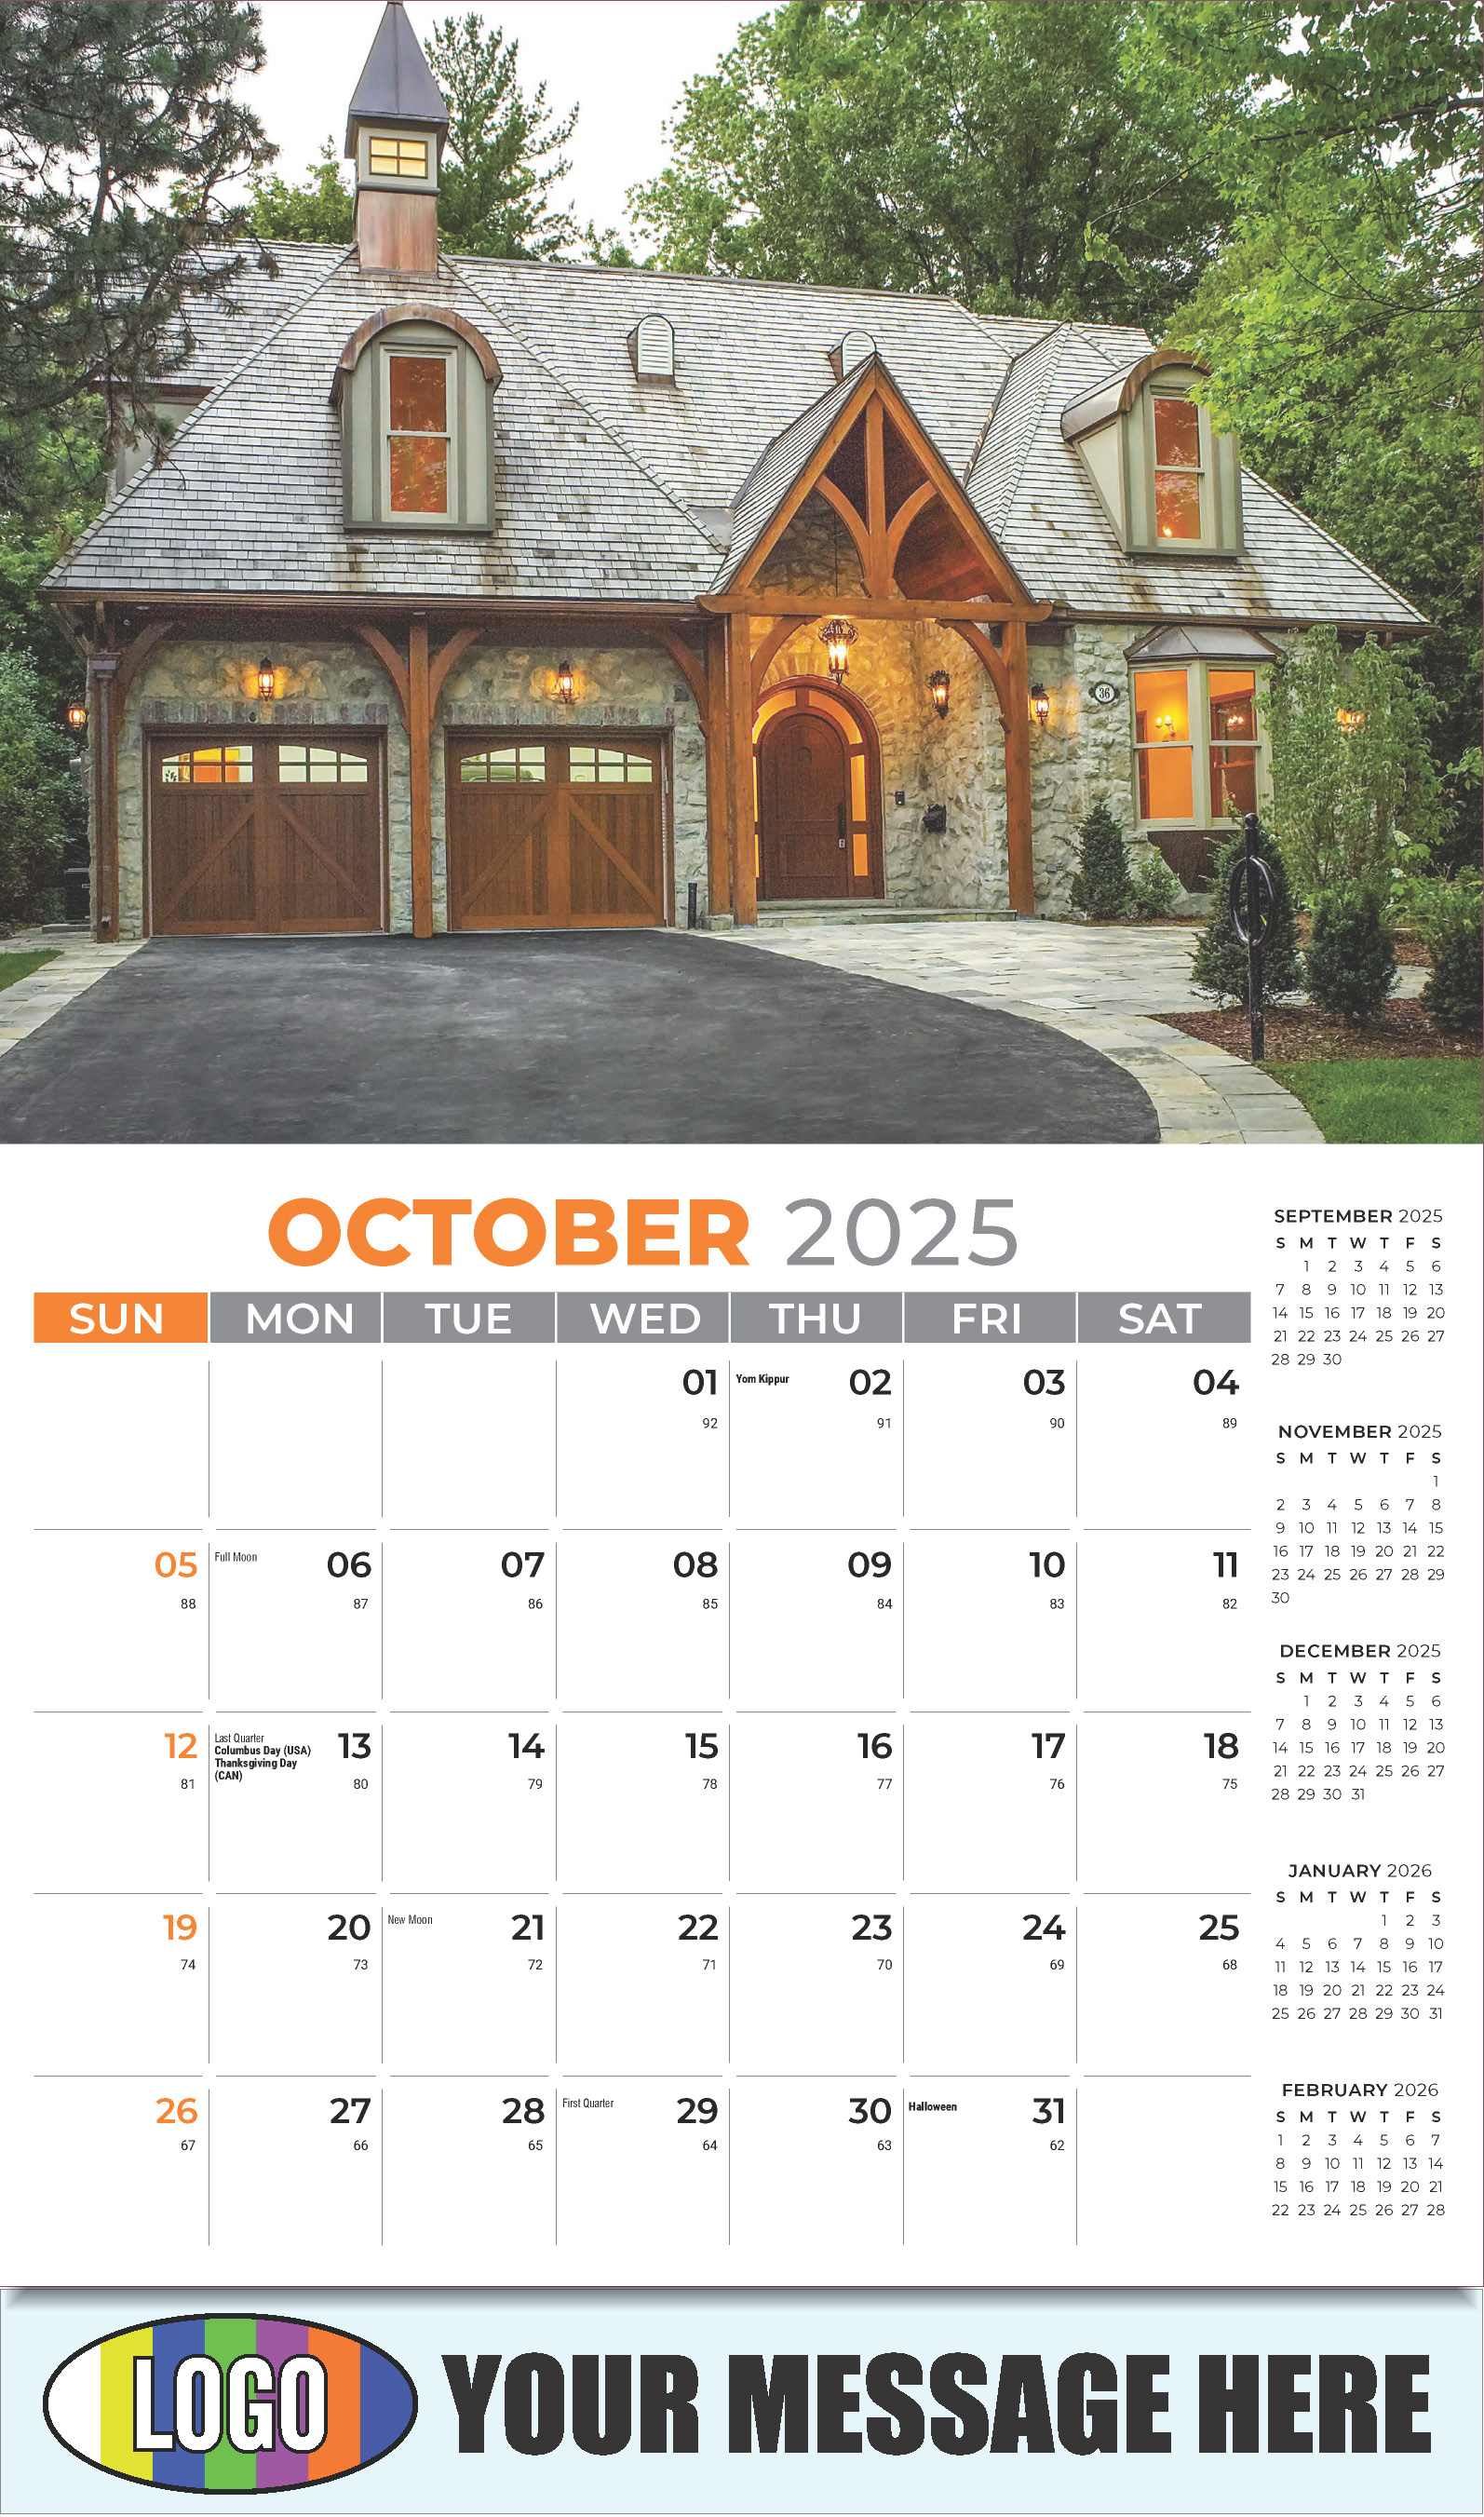 Luxury Homes 2025 Real Estate Agent Promotional Wall Calendar - October